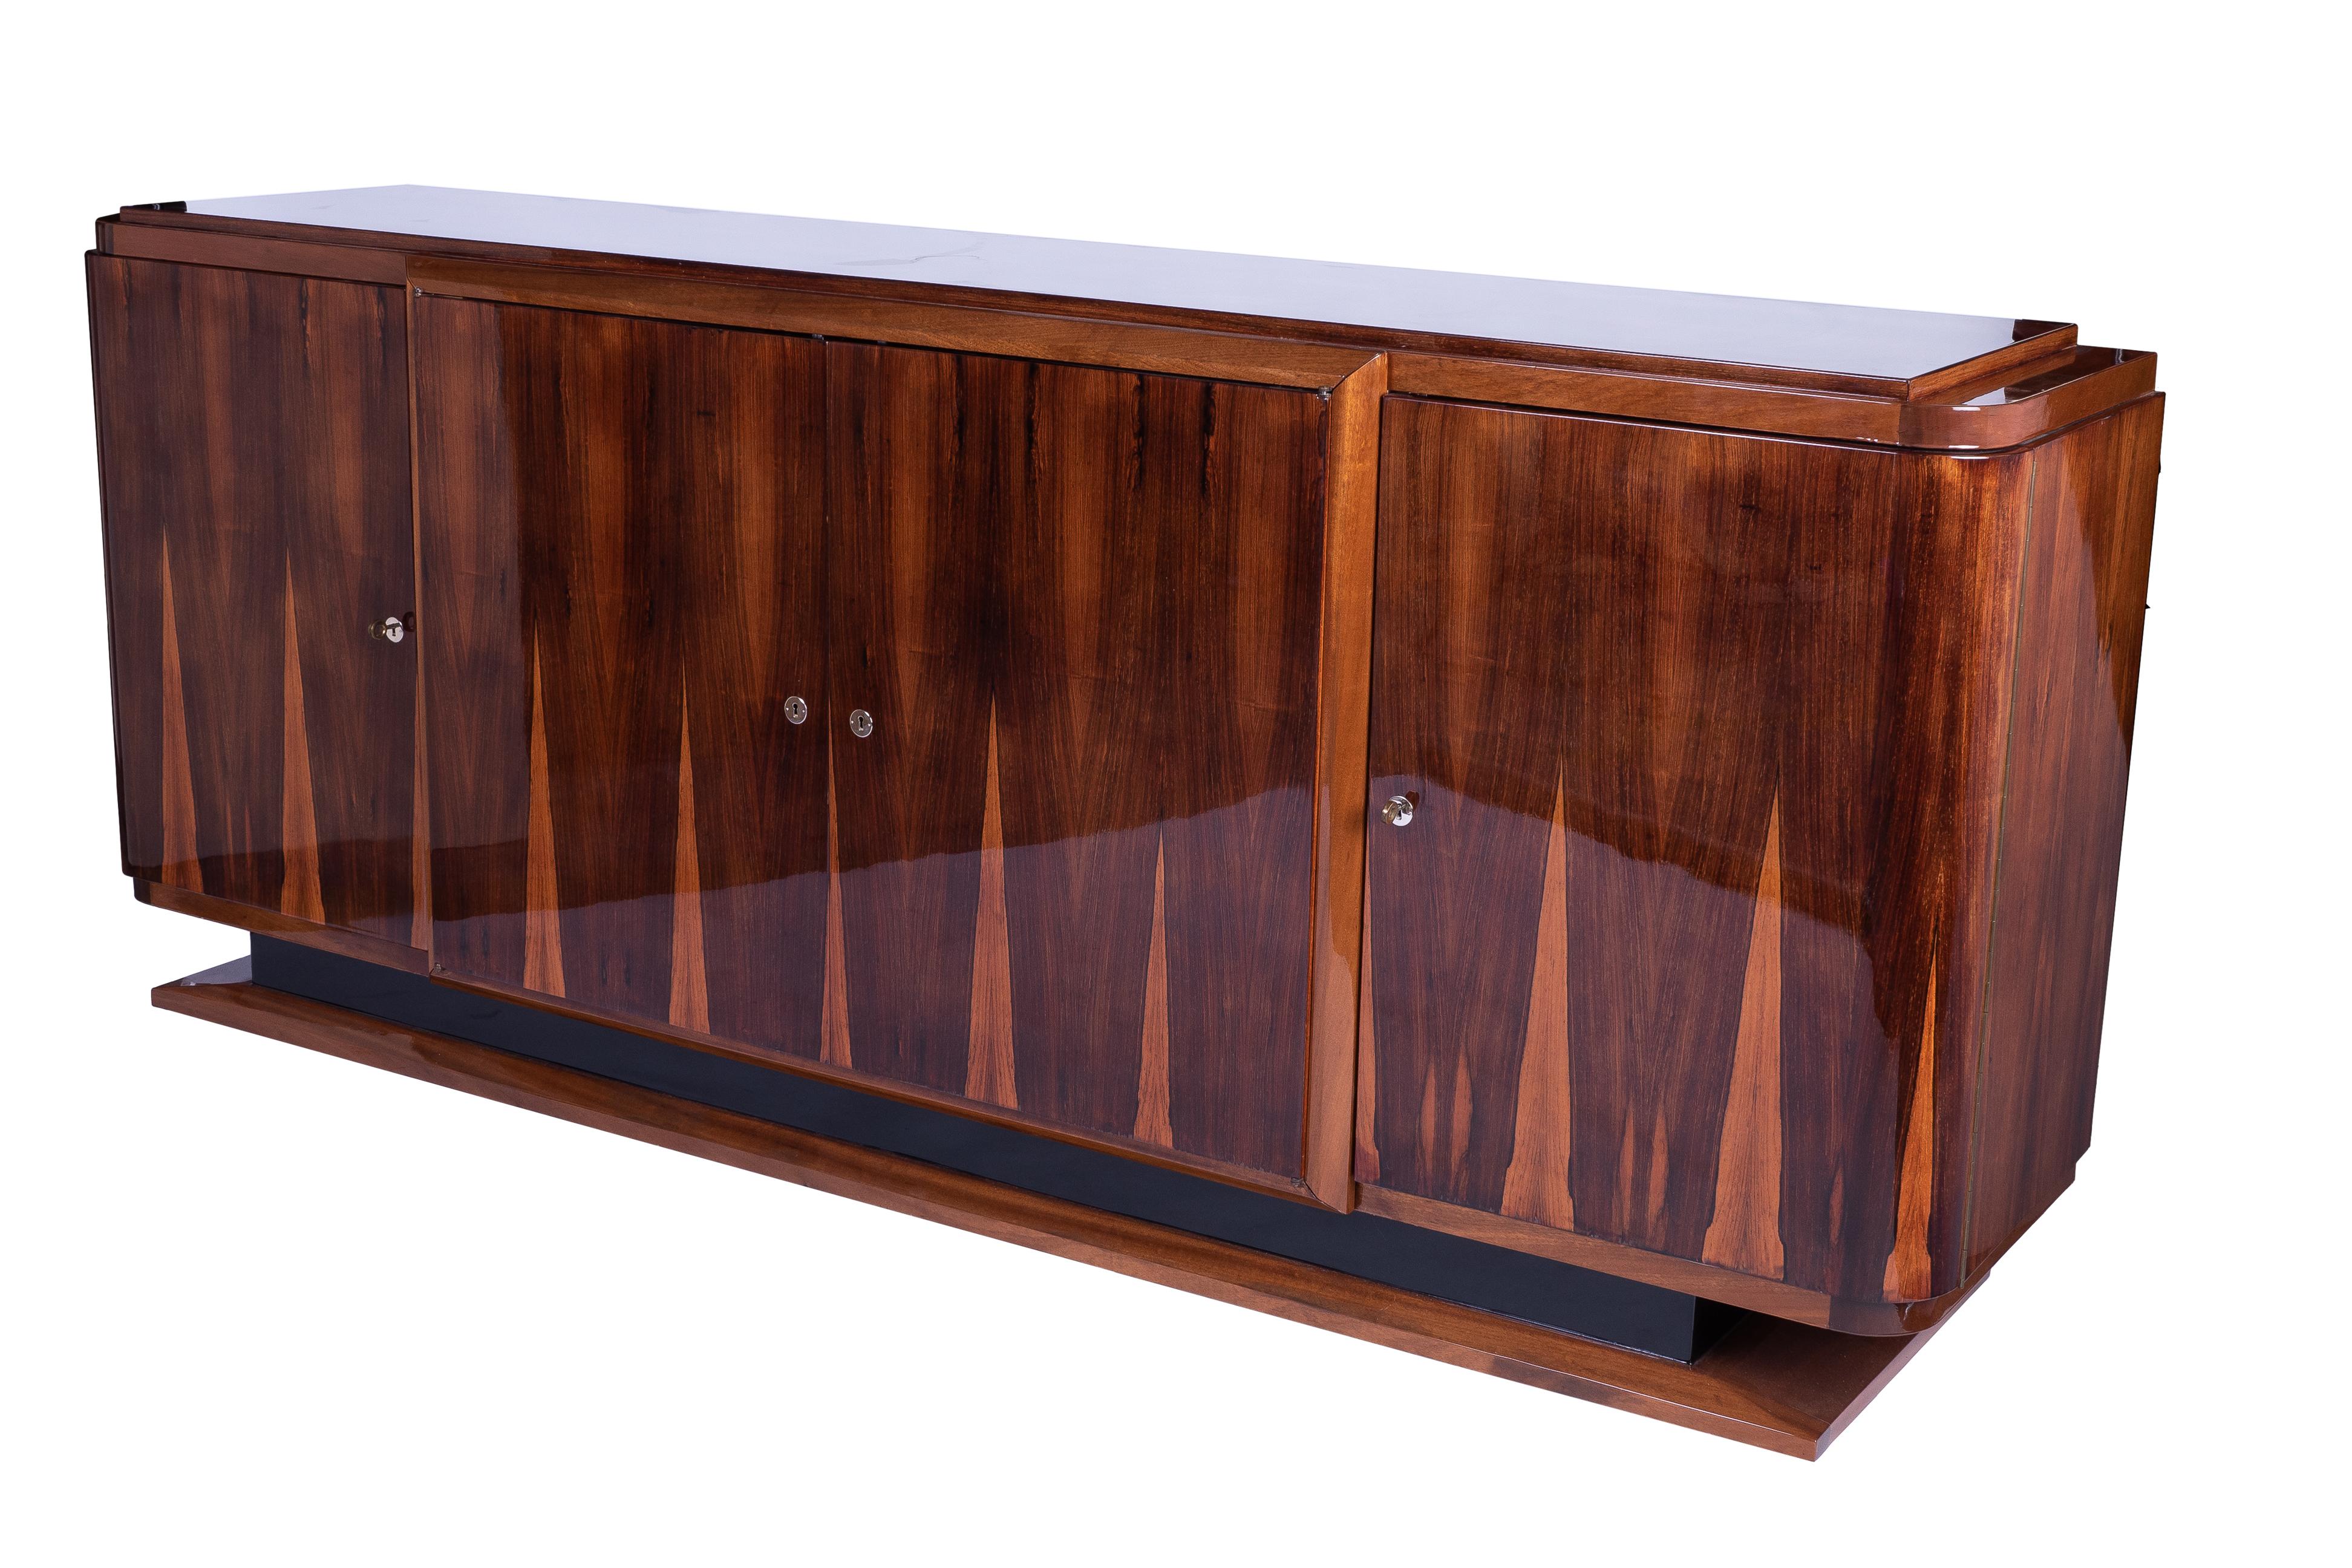 Grand Art Deco sideboard or credenza featuring a solid Mahogany frame veneered in beautifully book matched Rio rosewood and finished in a high gloss lacquer. The piece has large two single doors and one large center double door. Plenty of storage.